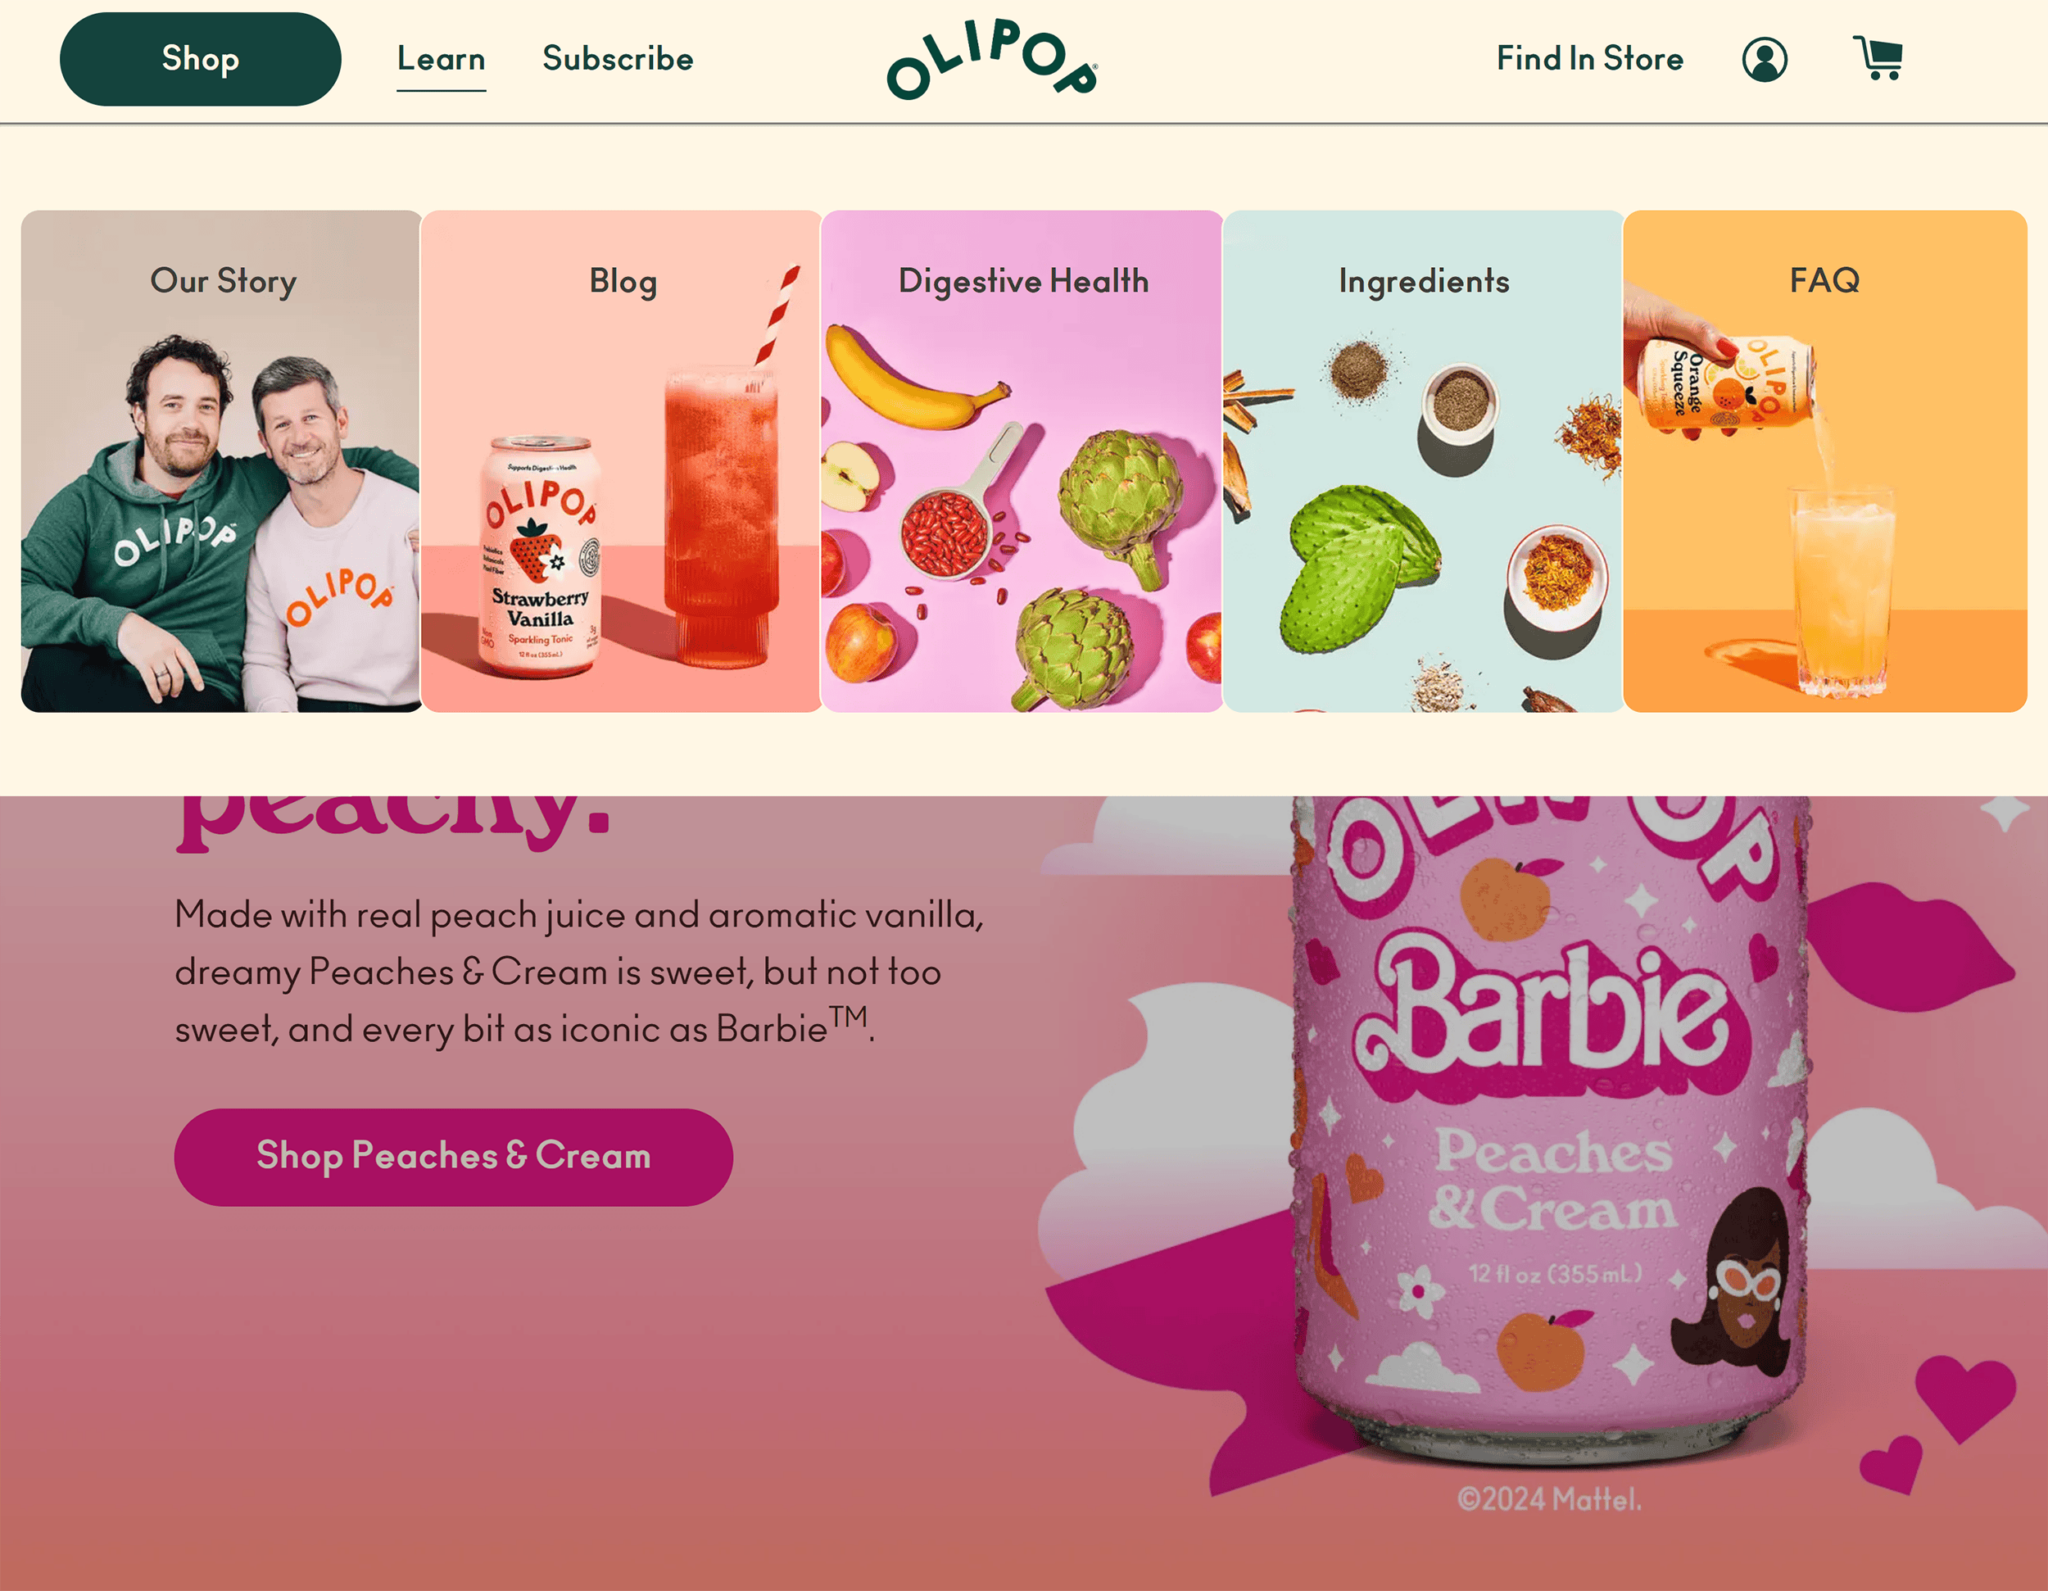 olipop-learn 22 Content Marketing Examples to Inspire You